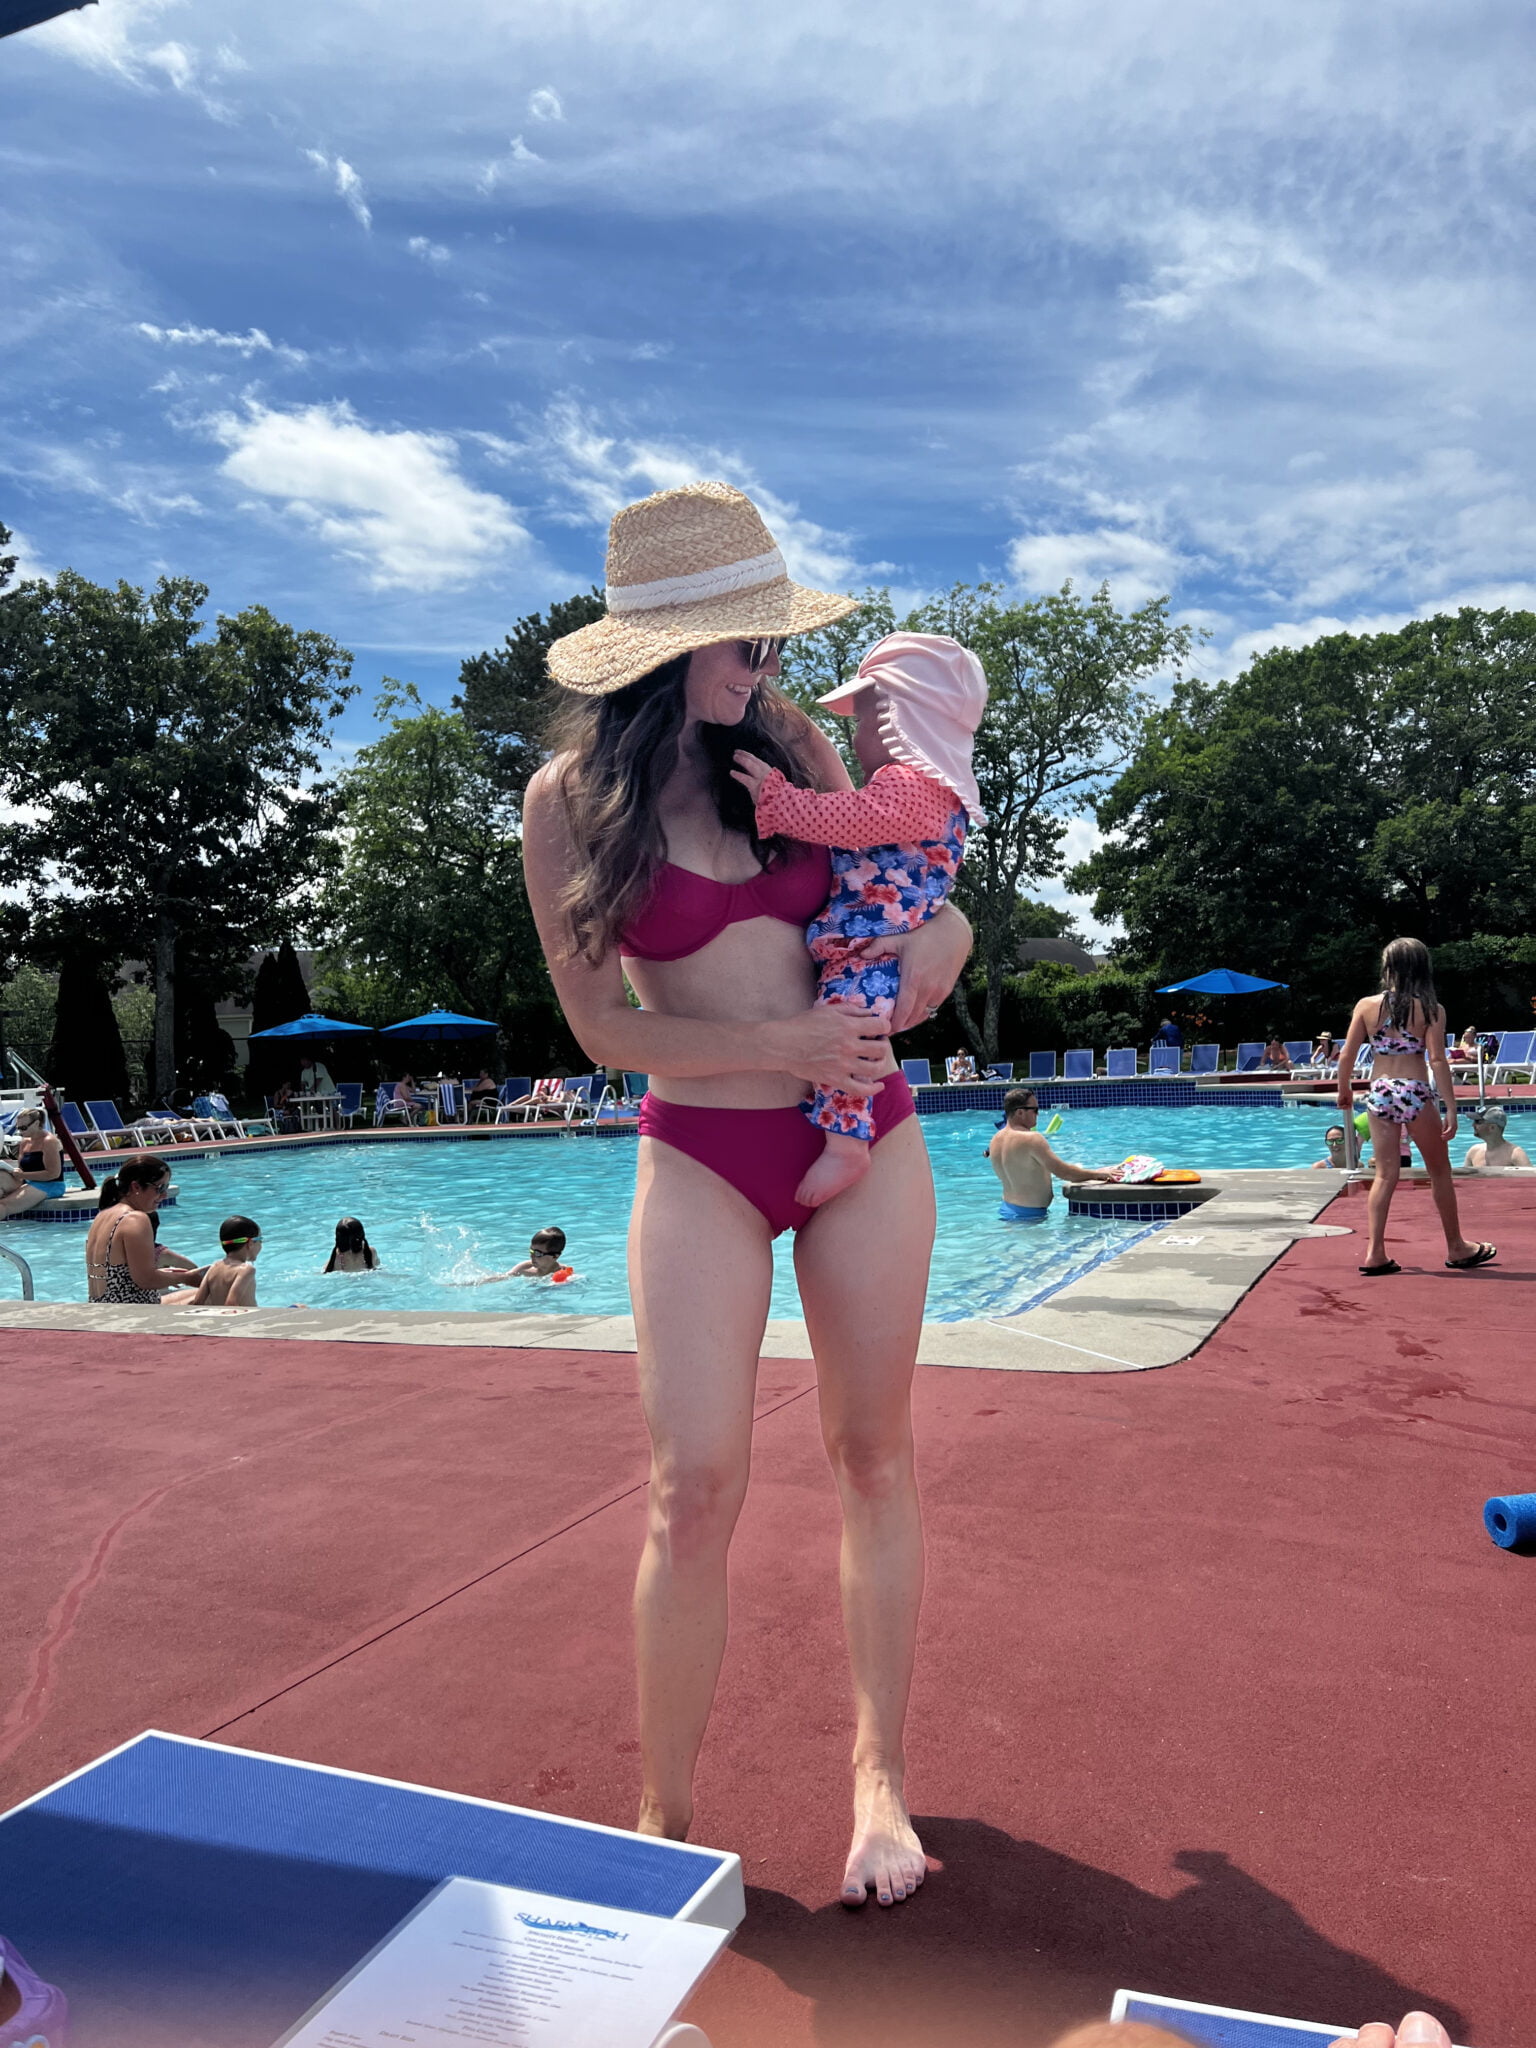 Mom with Baby at Pool Cape Cod